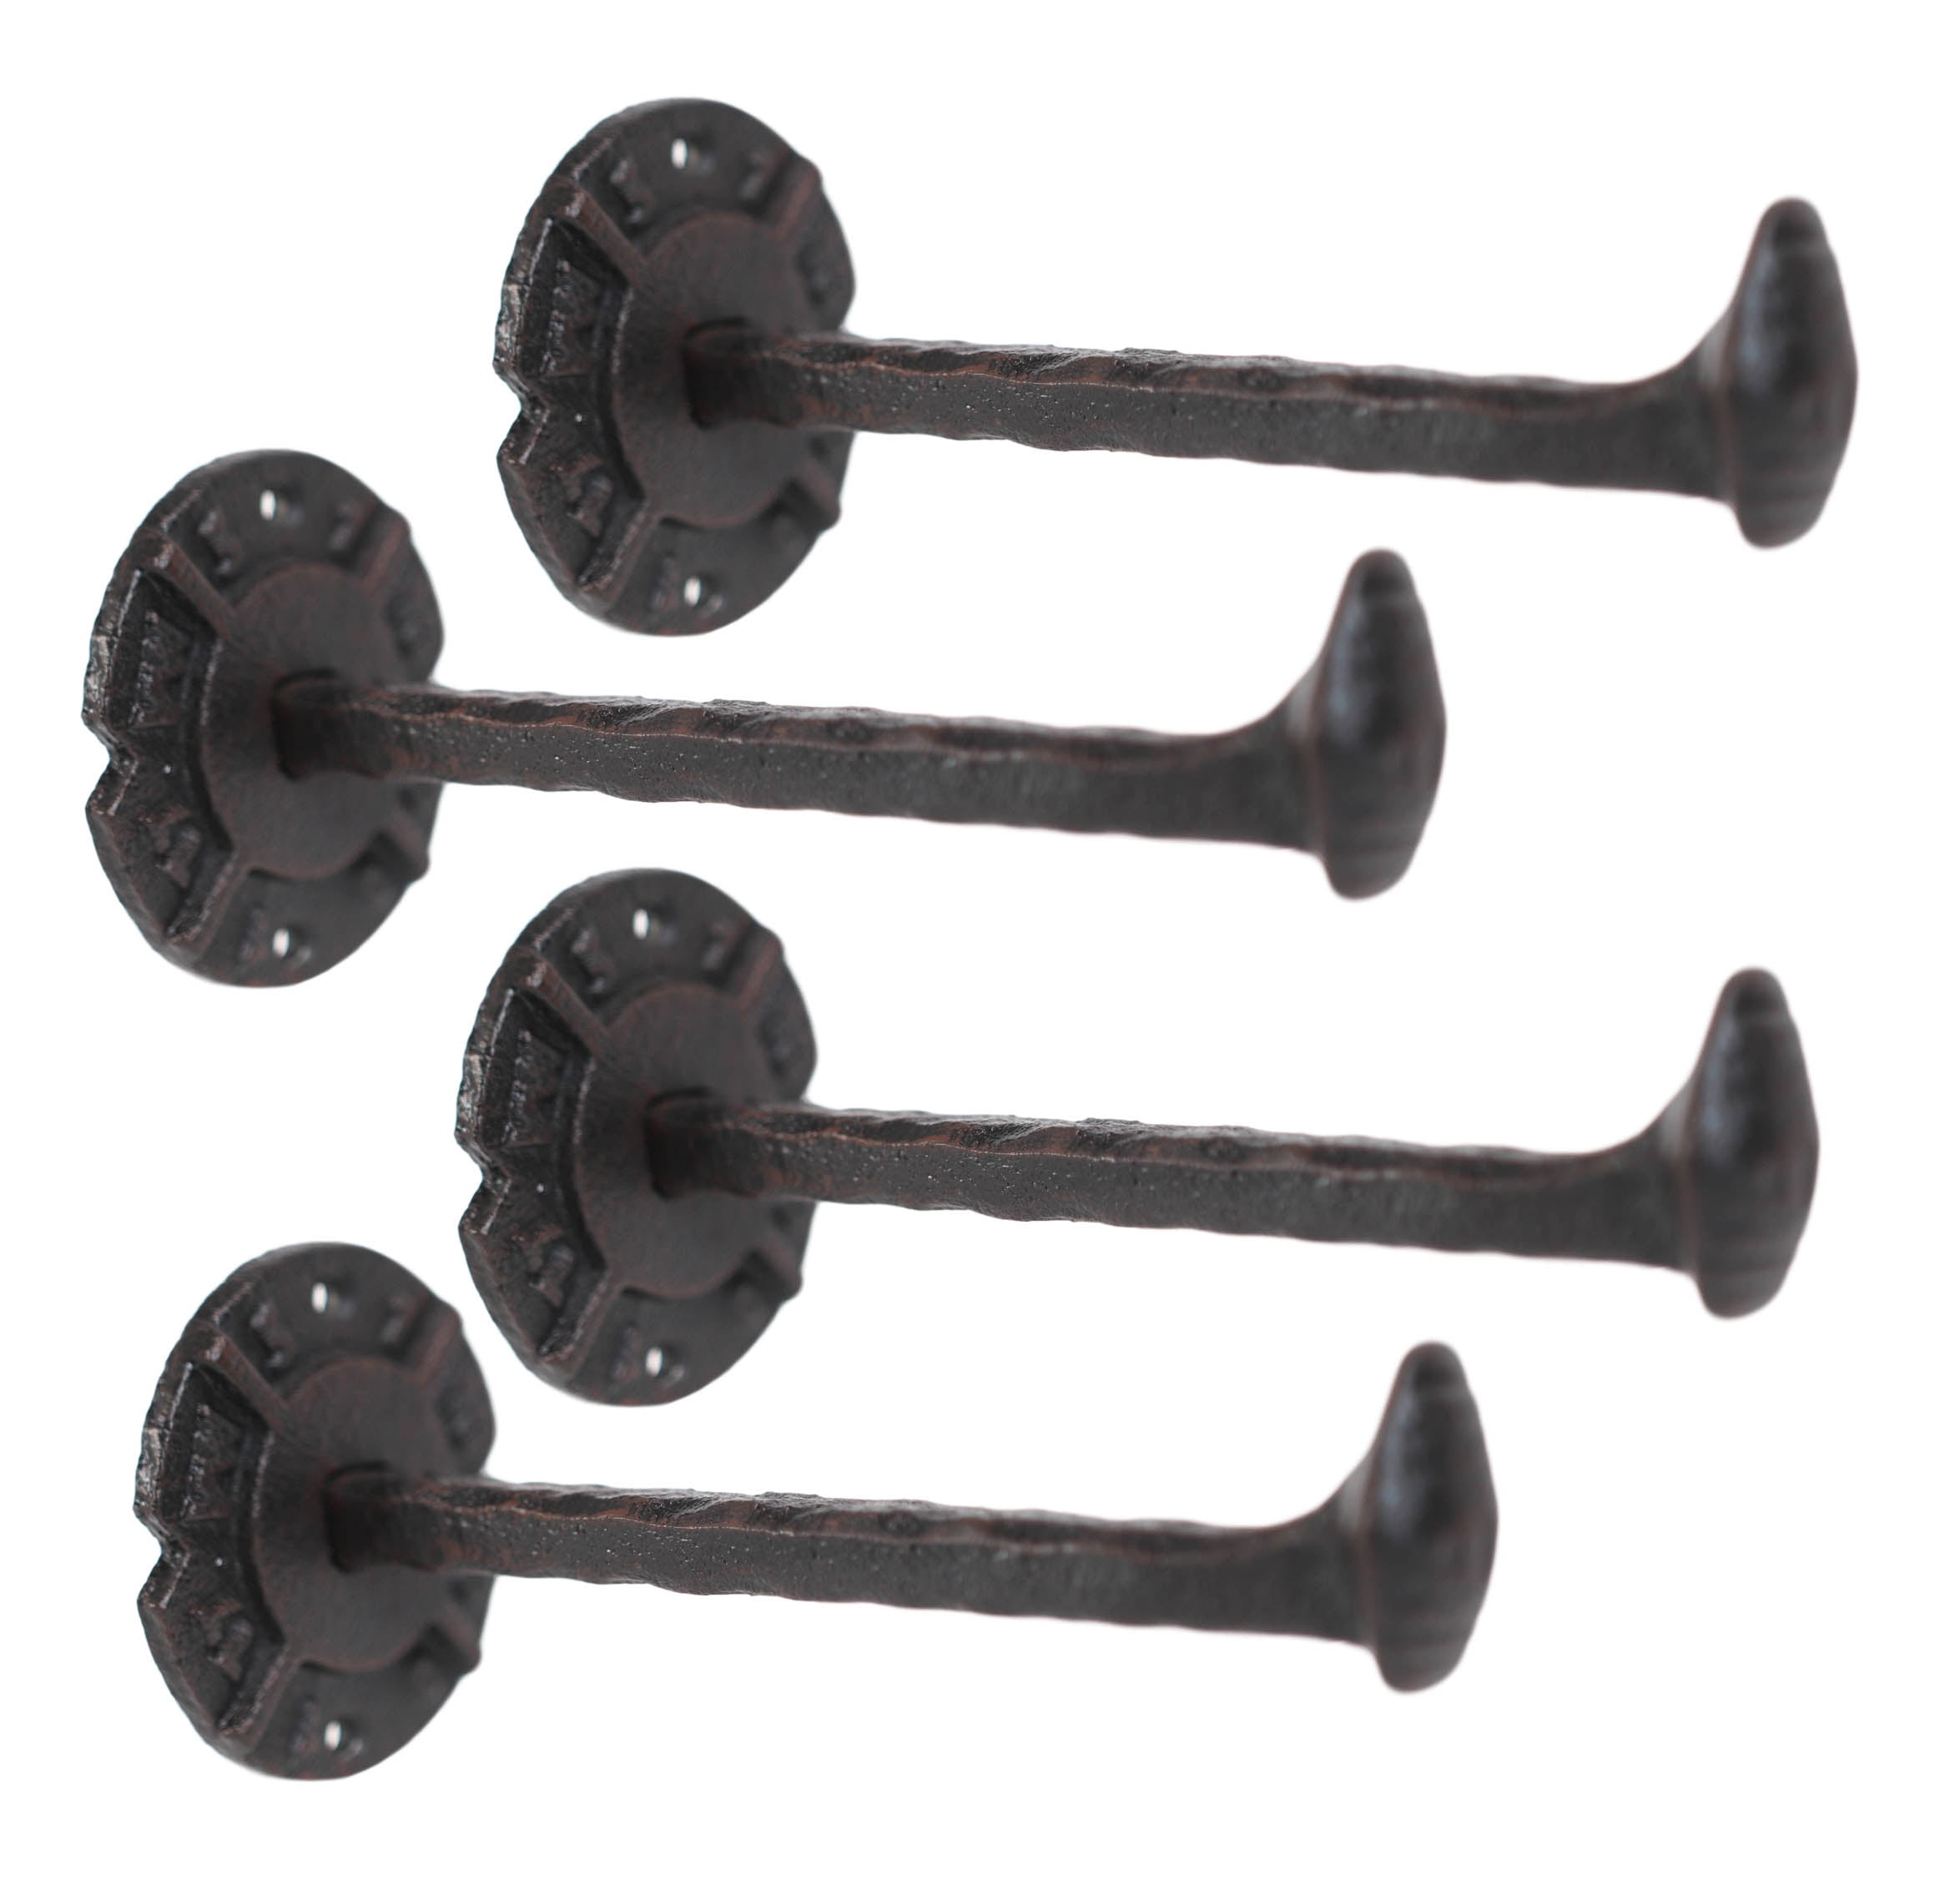 Details about   5 Pcs Cast Iron Wall Coat Hooks Hat Hook Hall Tree School Vintage Style 0N 